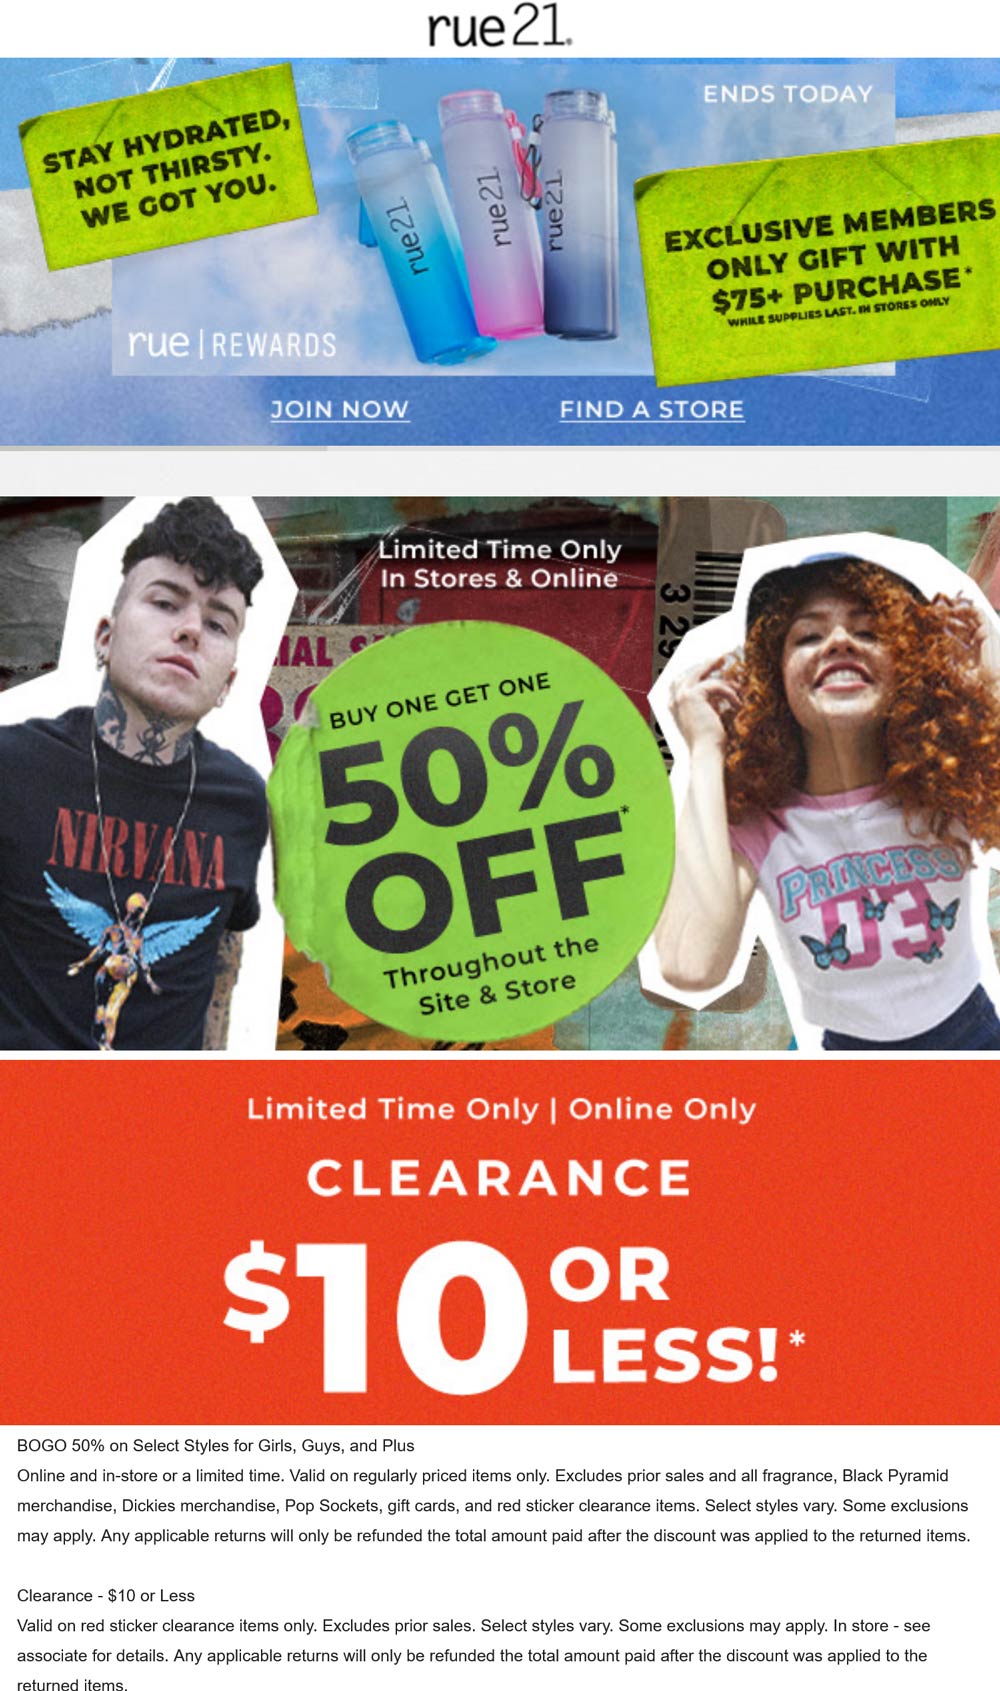 rue21 stores Coupon  Second item 50% off + free water bottle today at rue21, ditto online #rue21 